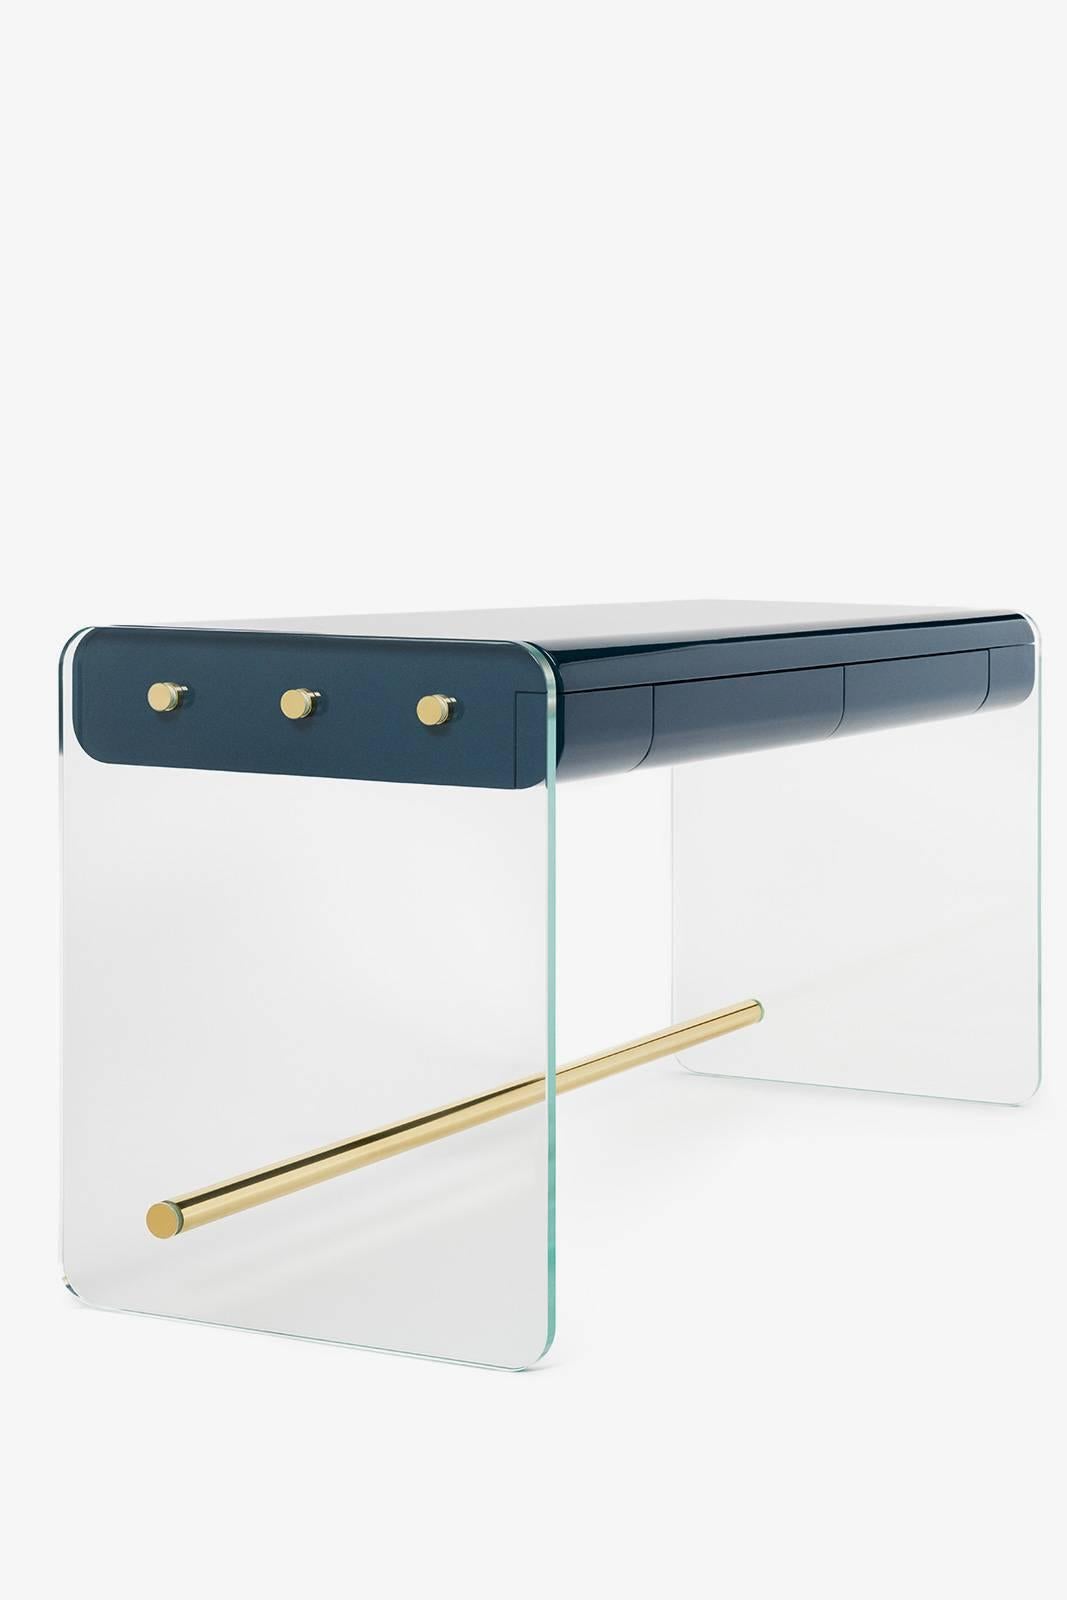 Elegant contemporary Bureau Marcello

Materials: gloss lacquer, glass, brass - velvet and ebony drawers

Designed by Joris Poggioli for Youth Editions.